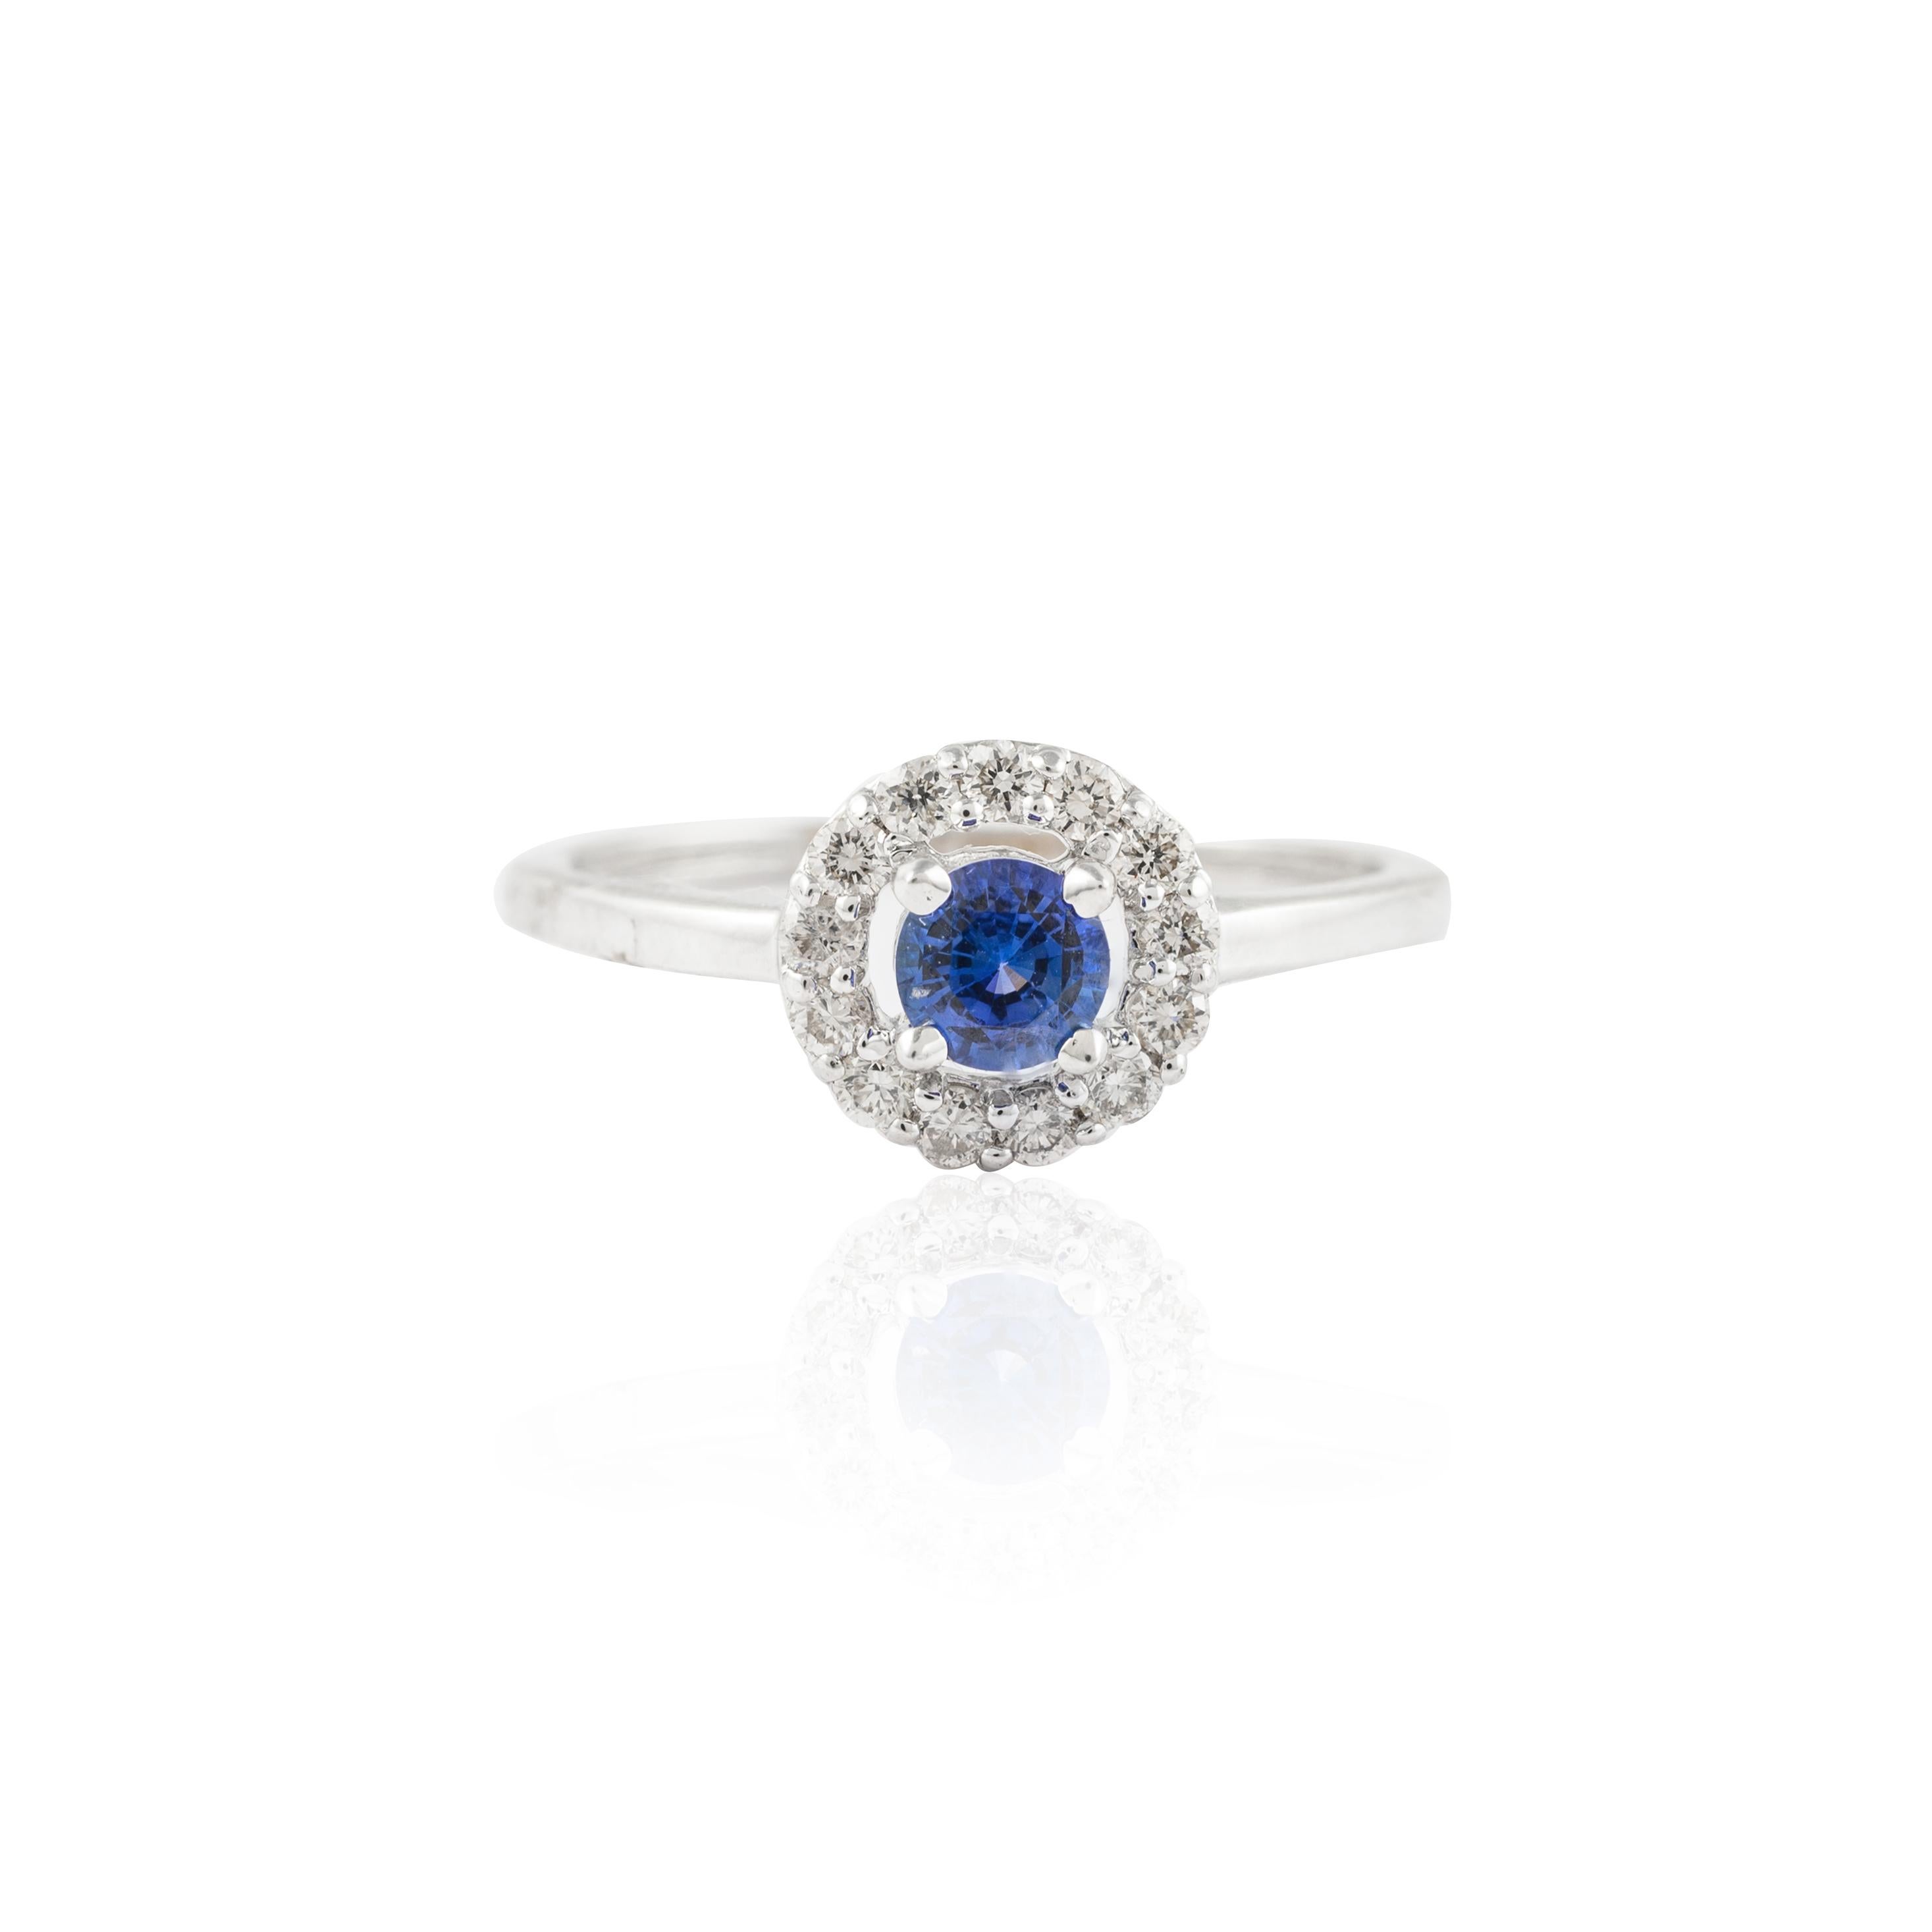 For Sale:  14K Solid White Gold Classic Round Blue Sapphire Ring with Halo Diamonds 2